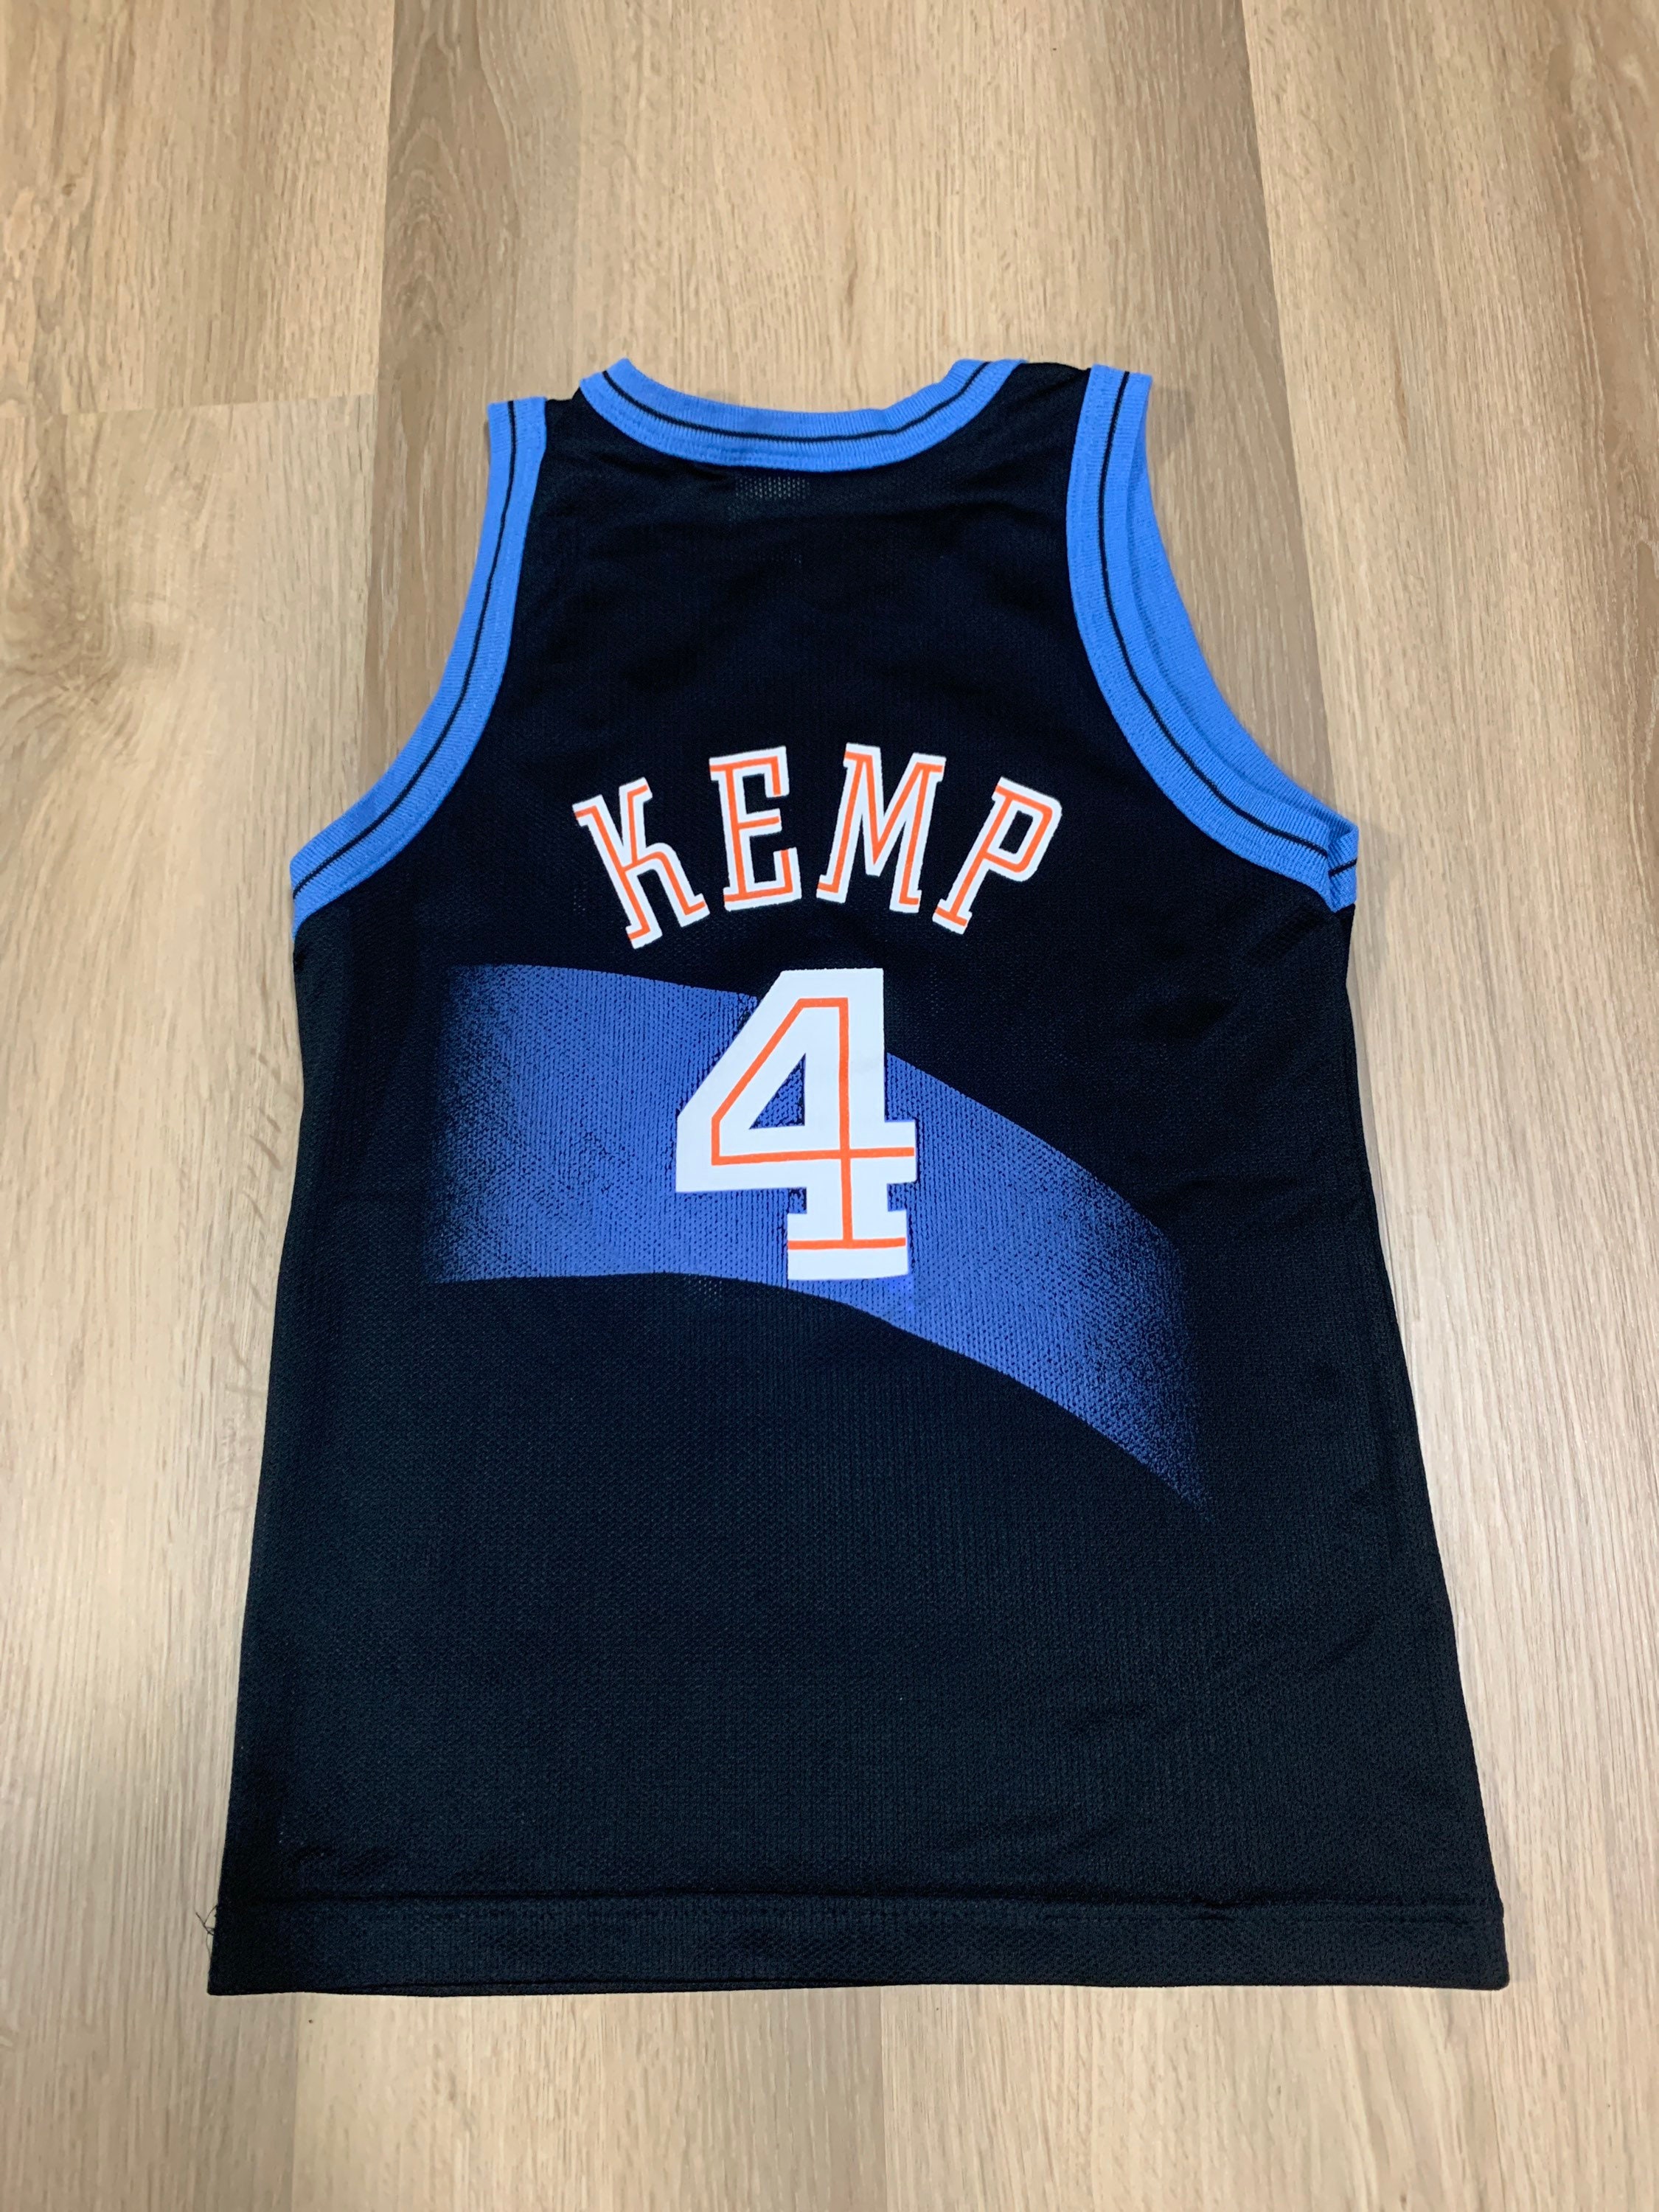 BuildinVintage Youth Vintage Champion #4 Shawn Kemp Cleveland Cavaliers NBA Jersey Size M 10-12